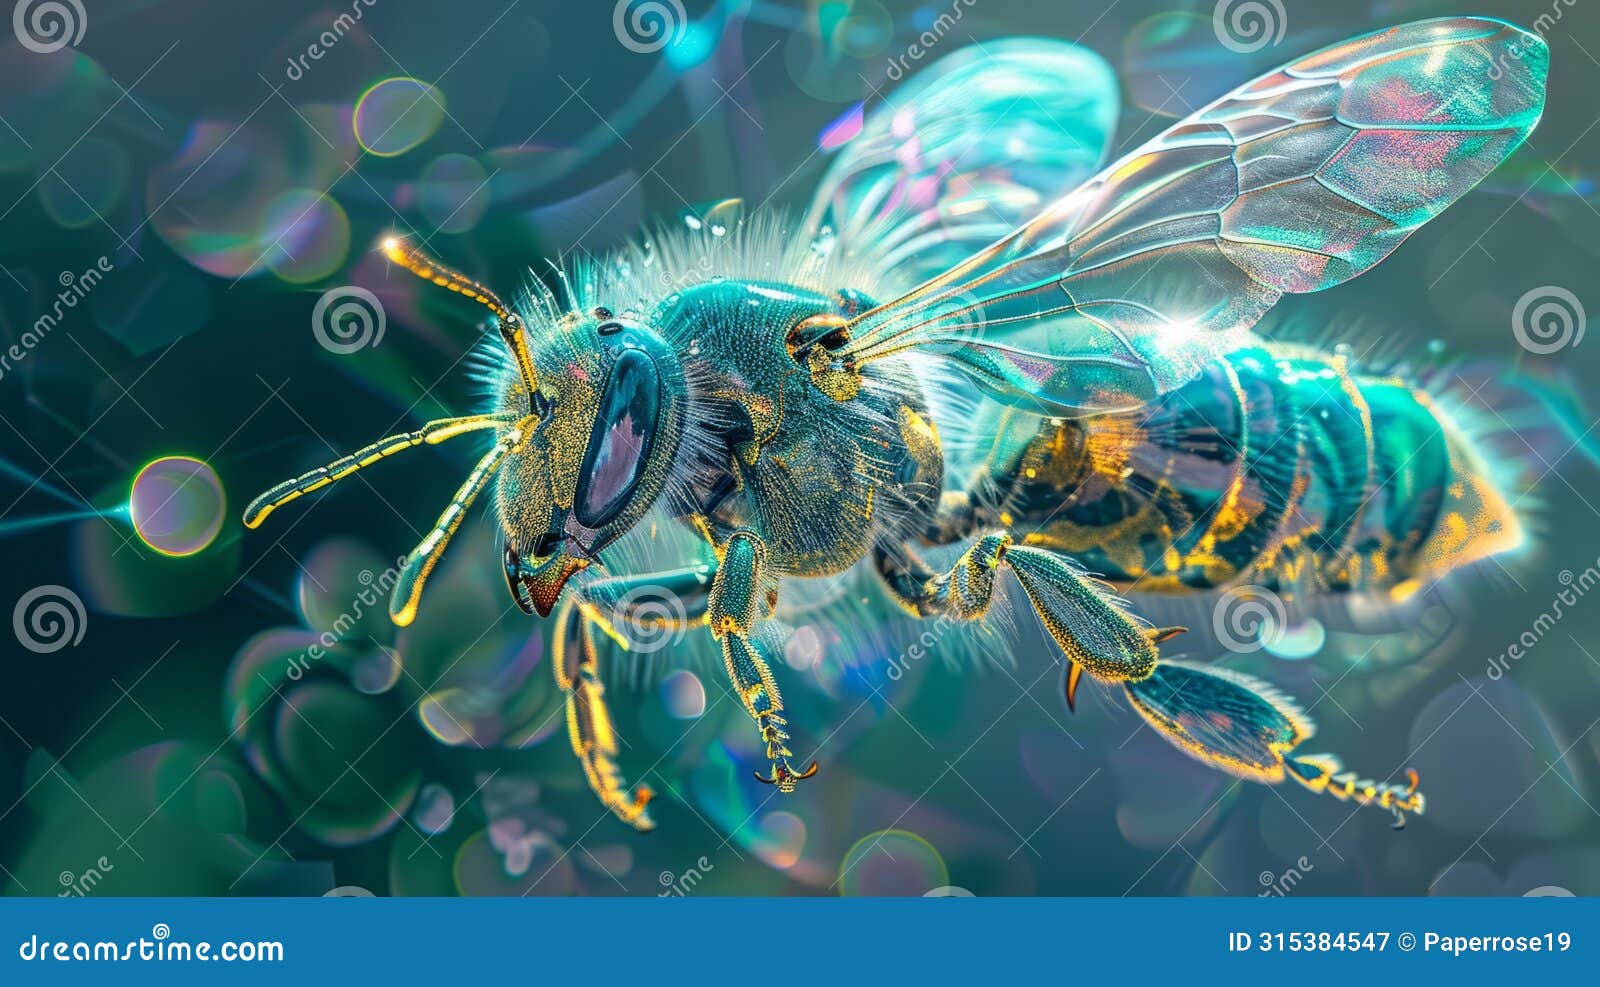 a hyperrealistic hyper detailed photograph of an insanely beautiful crystal bee